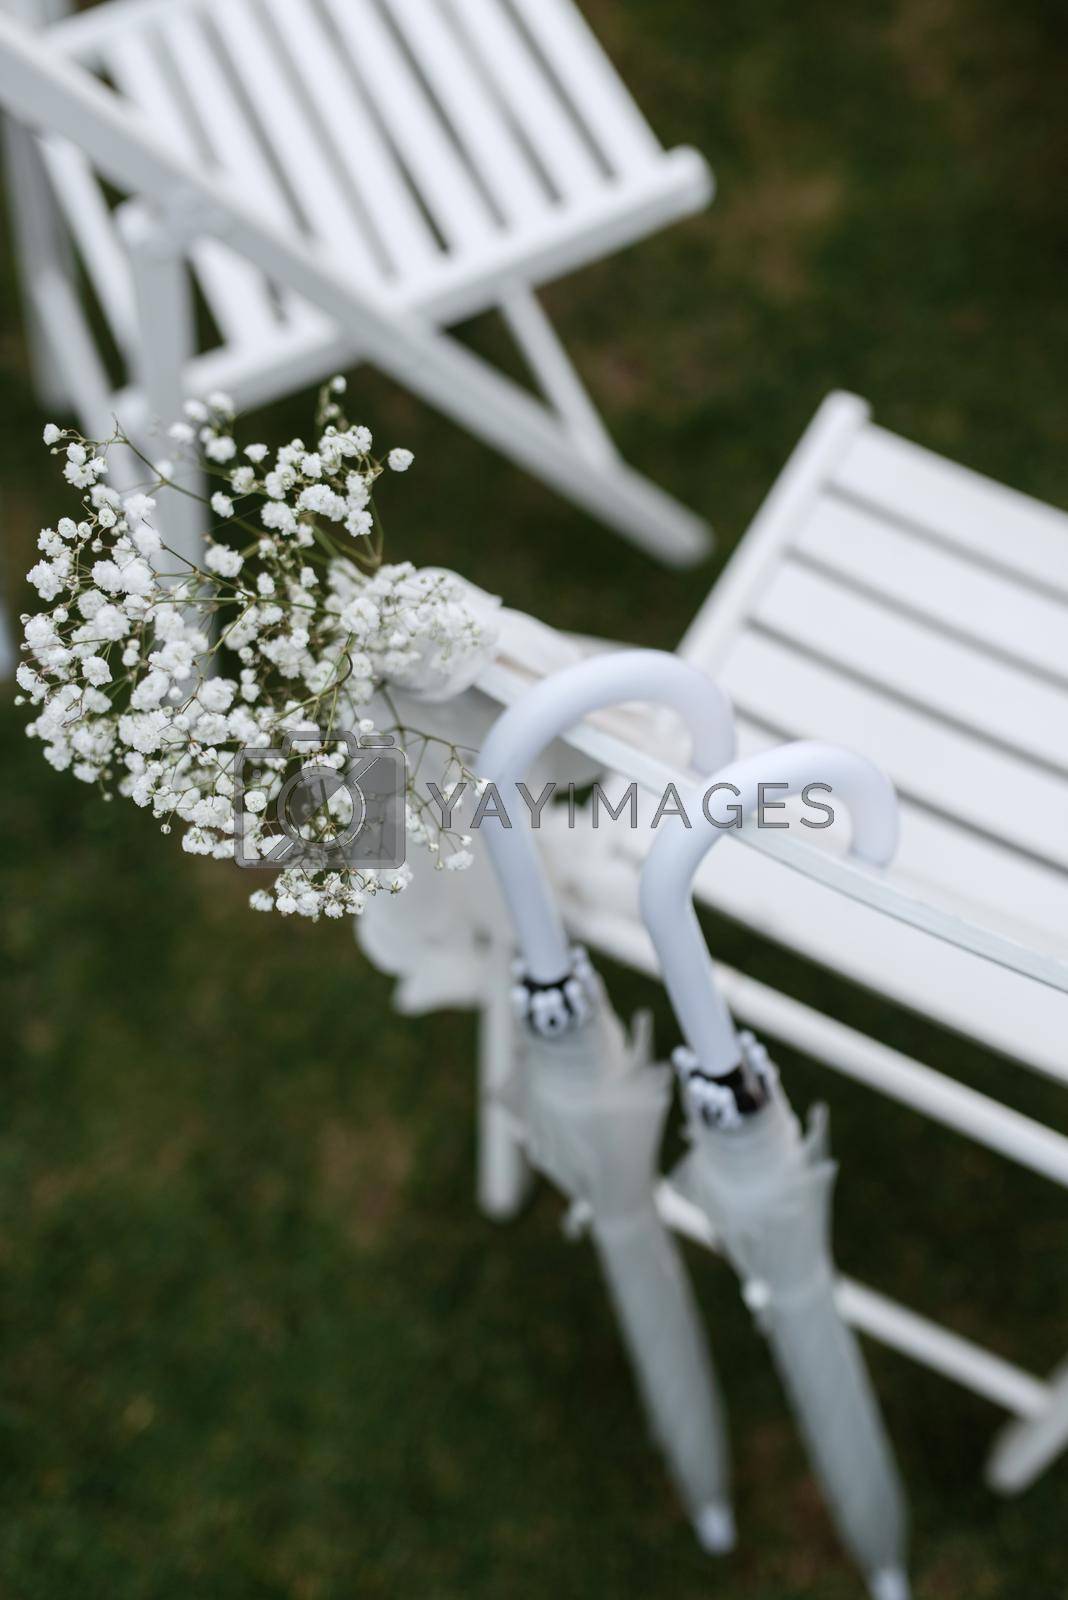 Royalty free image of white wooden chairs for wedding ceremony by Andreua